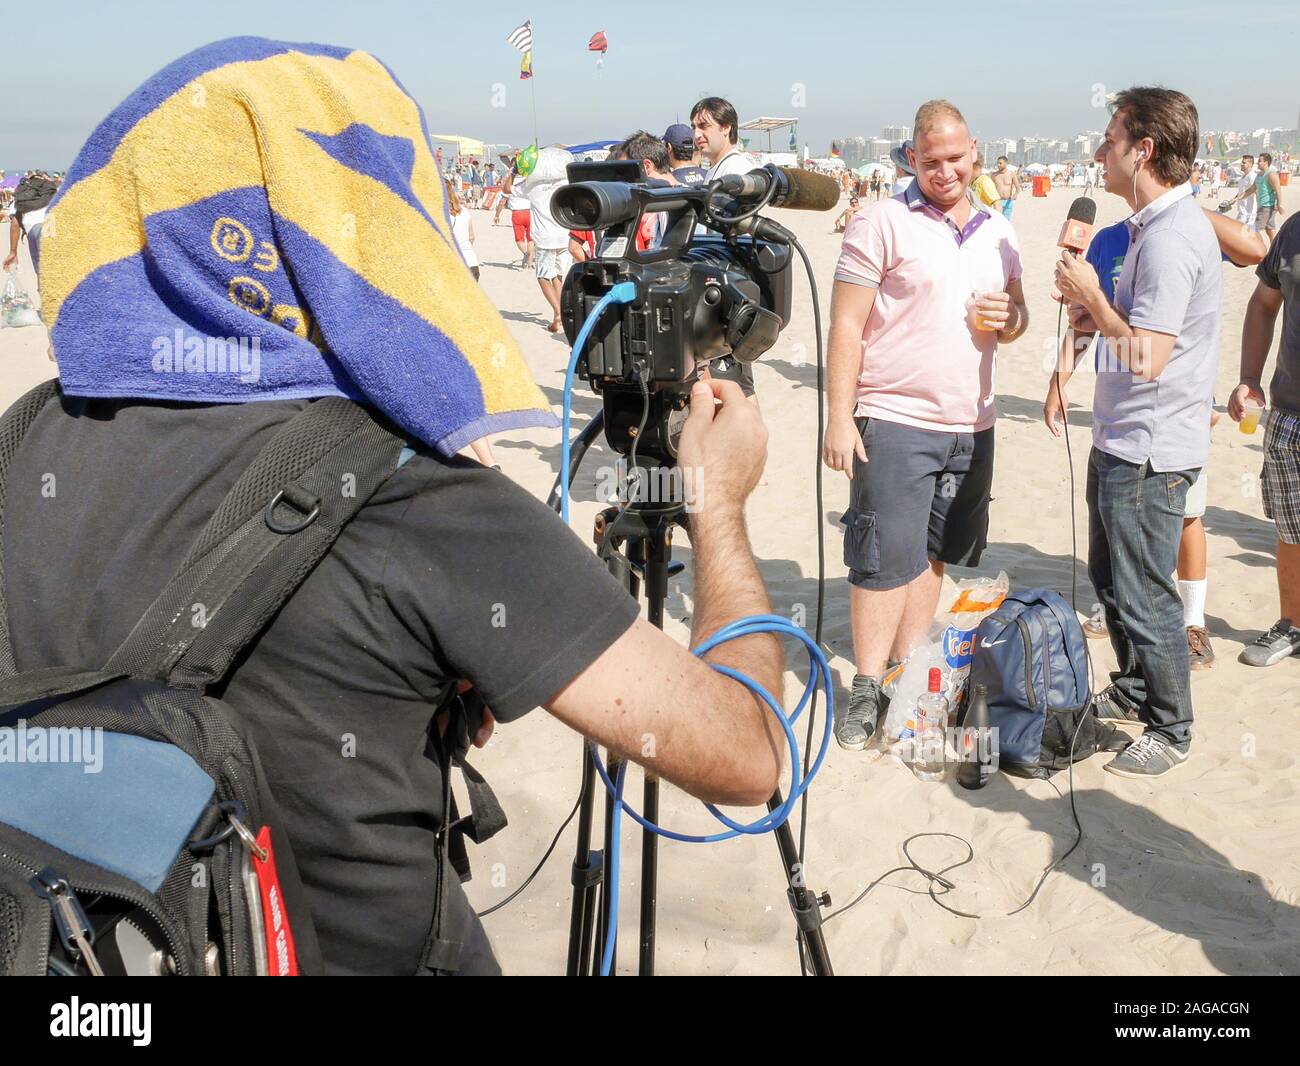 TV Interview, Rio, Brazil. A camera operator shields himself from the sun as he films a location TV interview on a Rio beach. Stock Photo